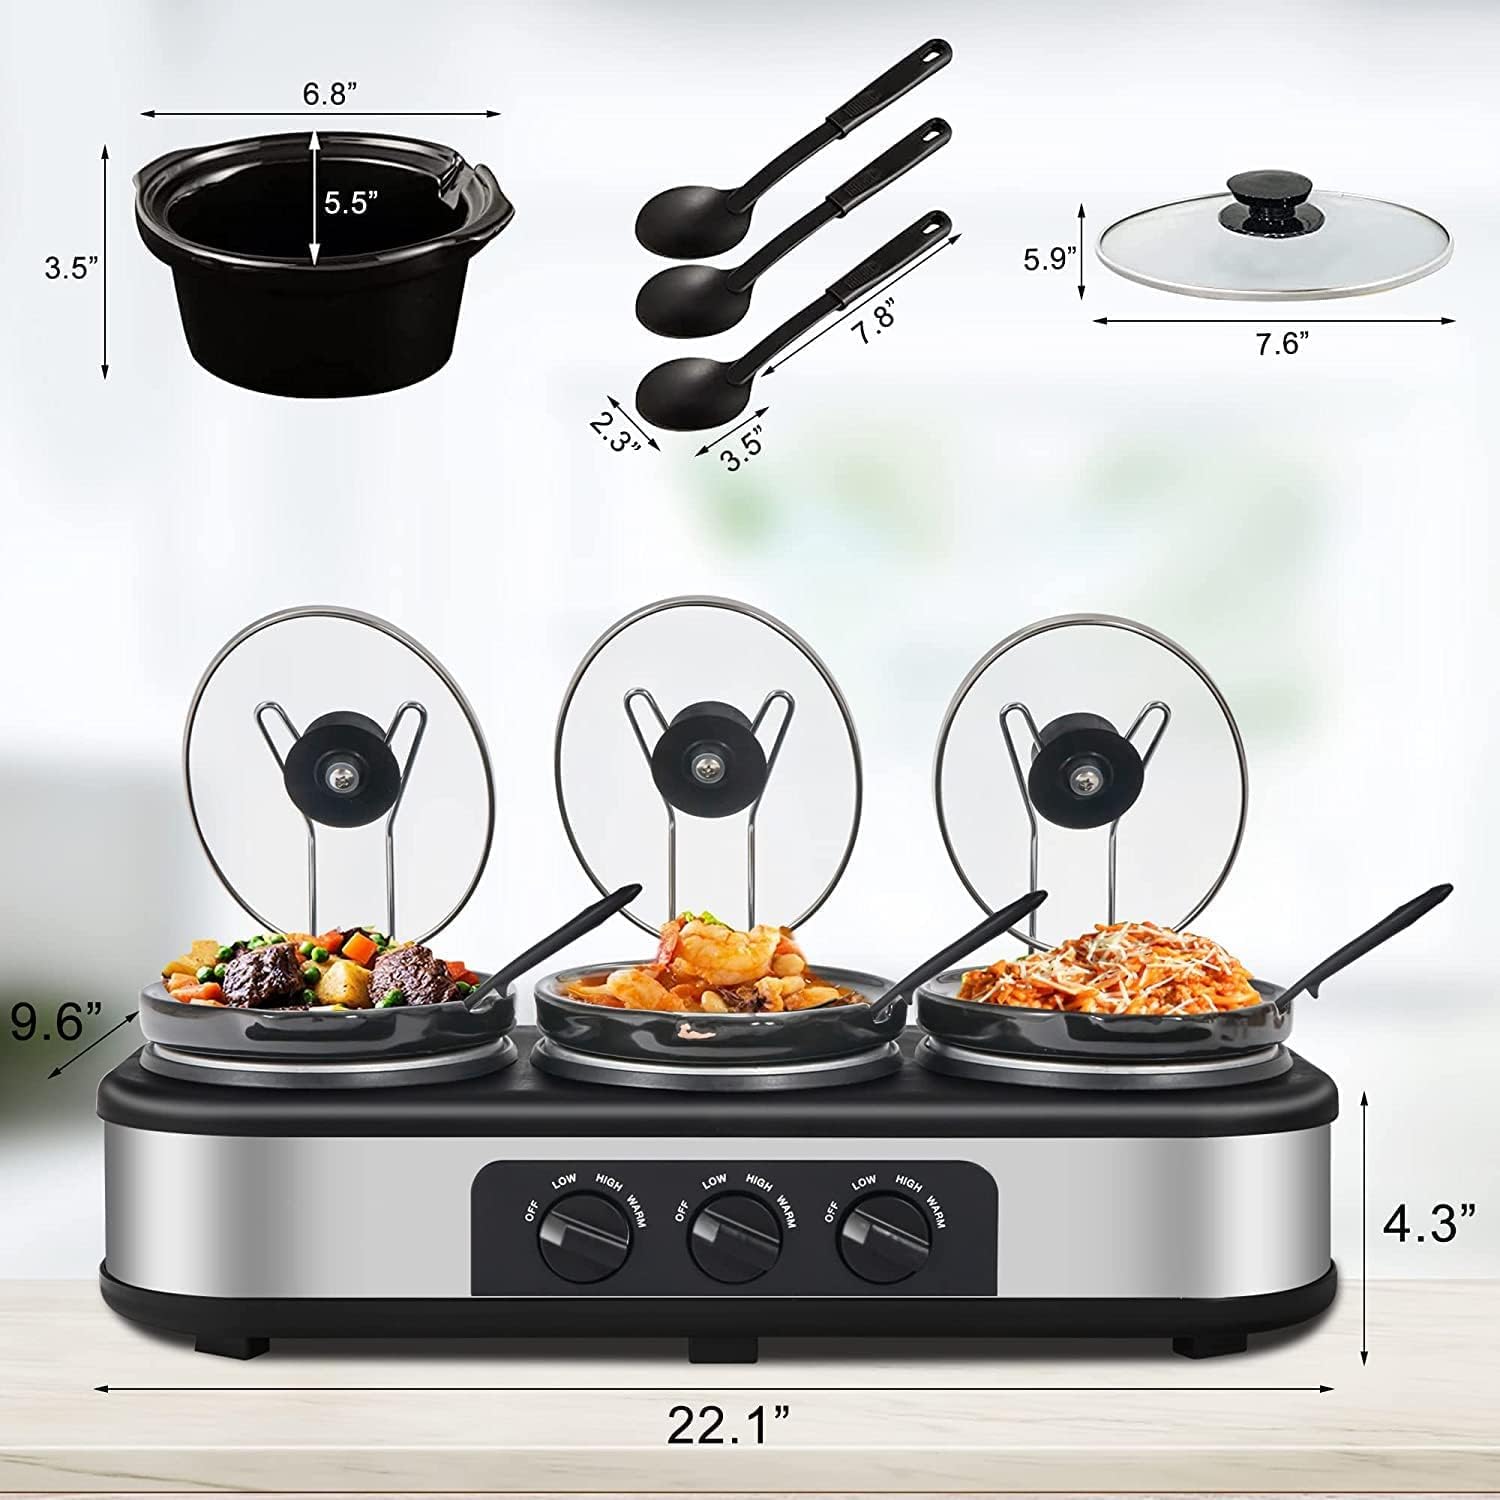 Triple Slow Cooker with Lid Rests, Breakfast Buffet Servers and Warmers with 3 X 1.5Qt, Tempered glass lids  3 Adjustable Temp, Dishwasher Safe, Stainless Steel